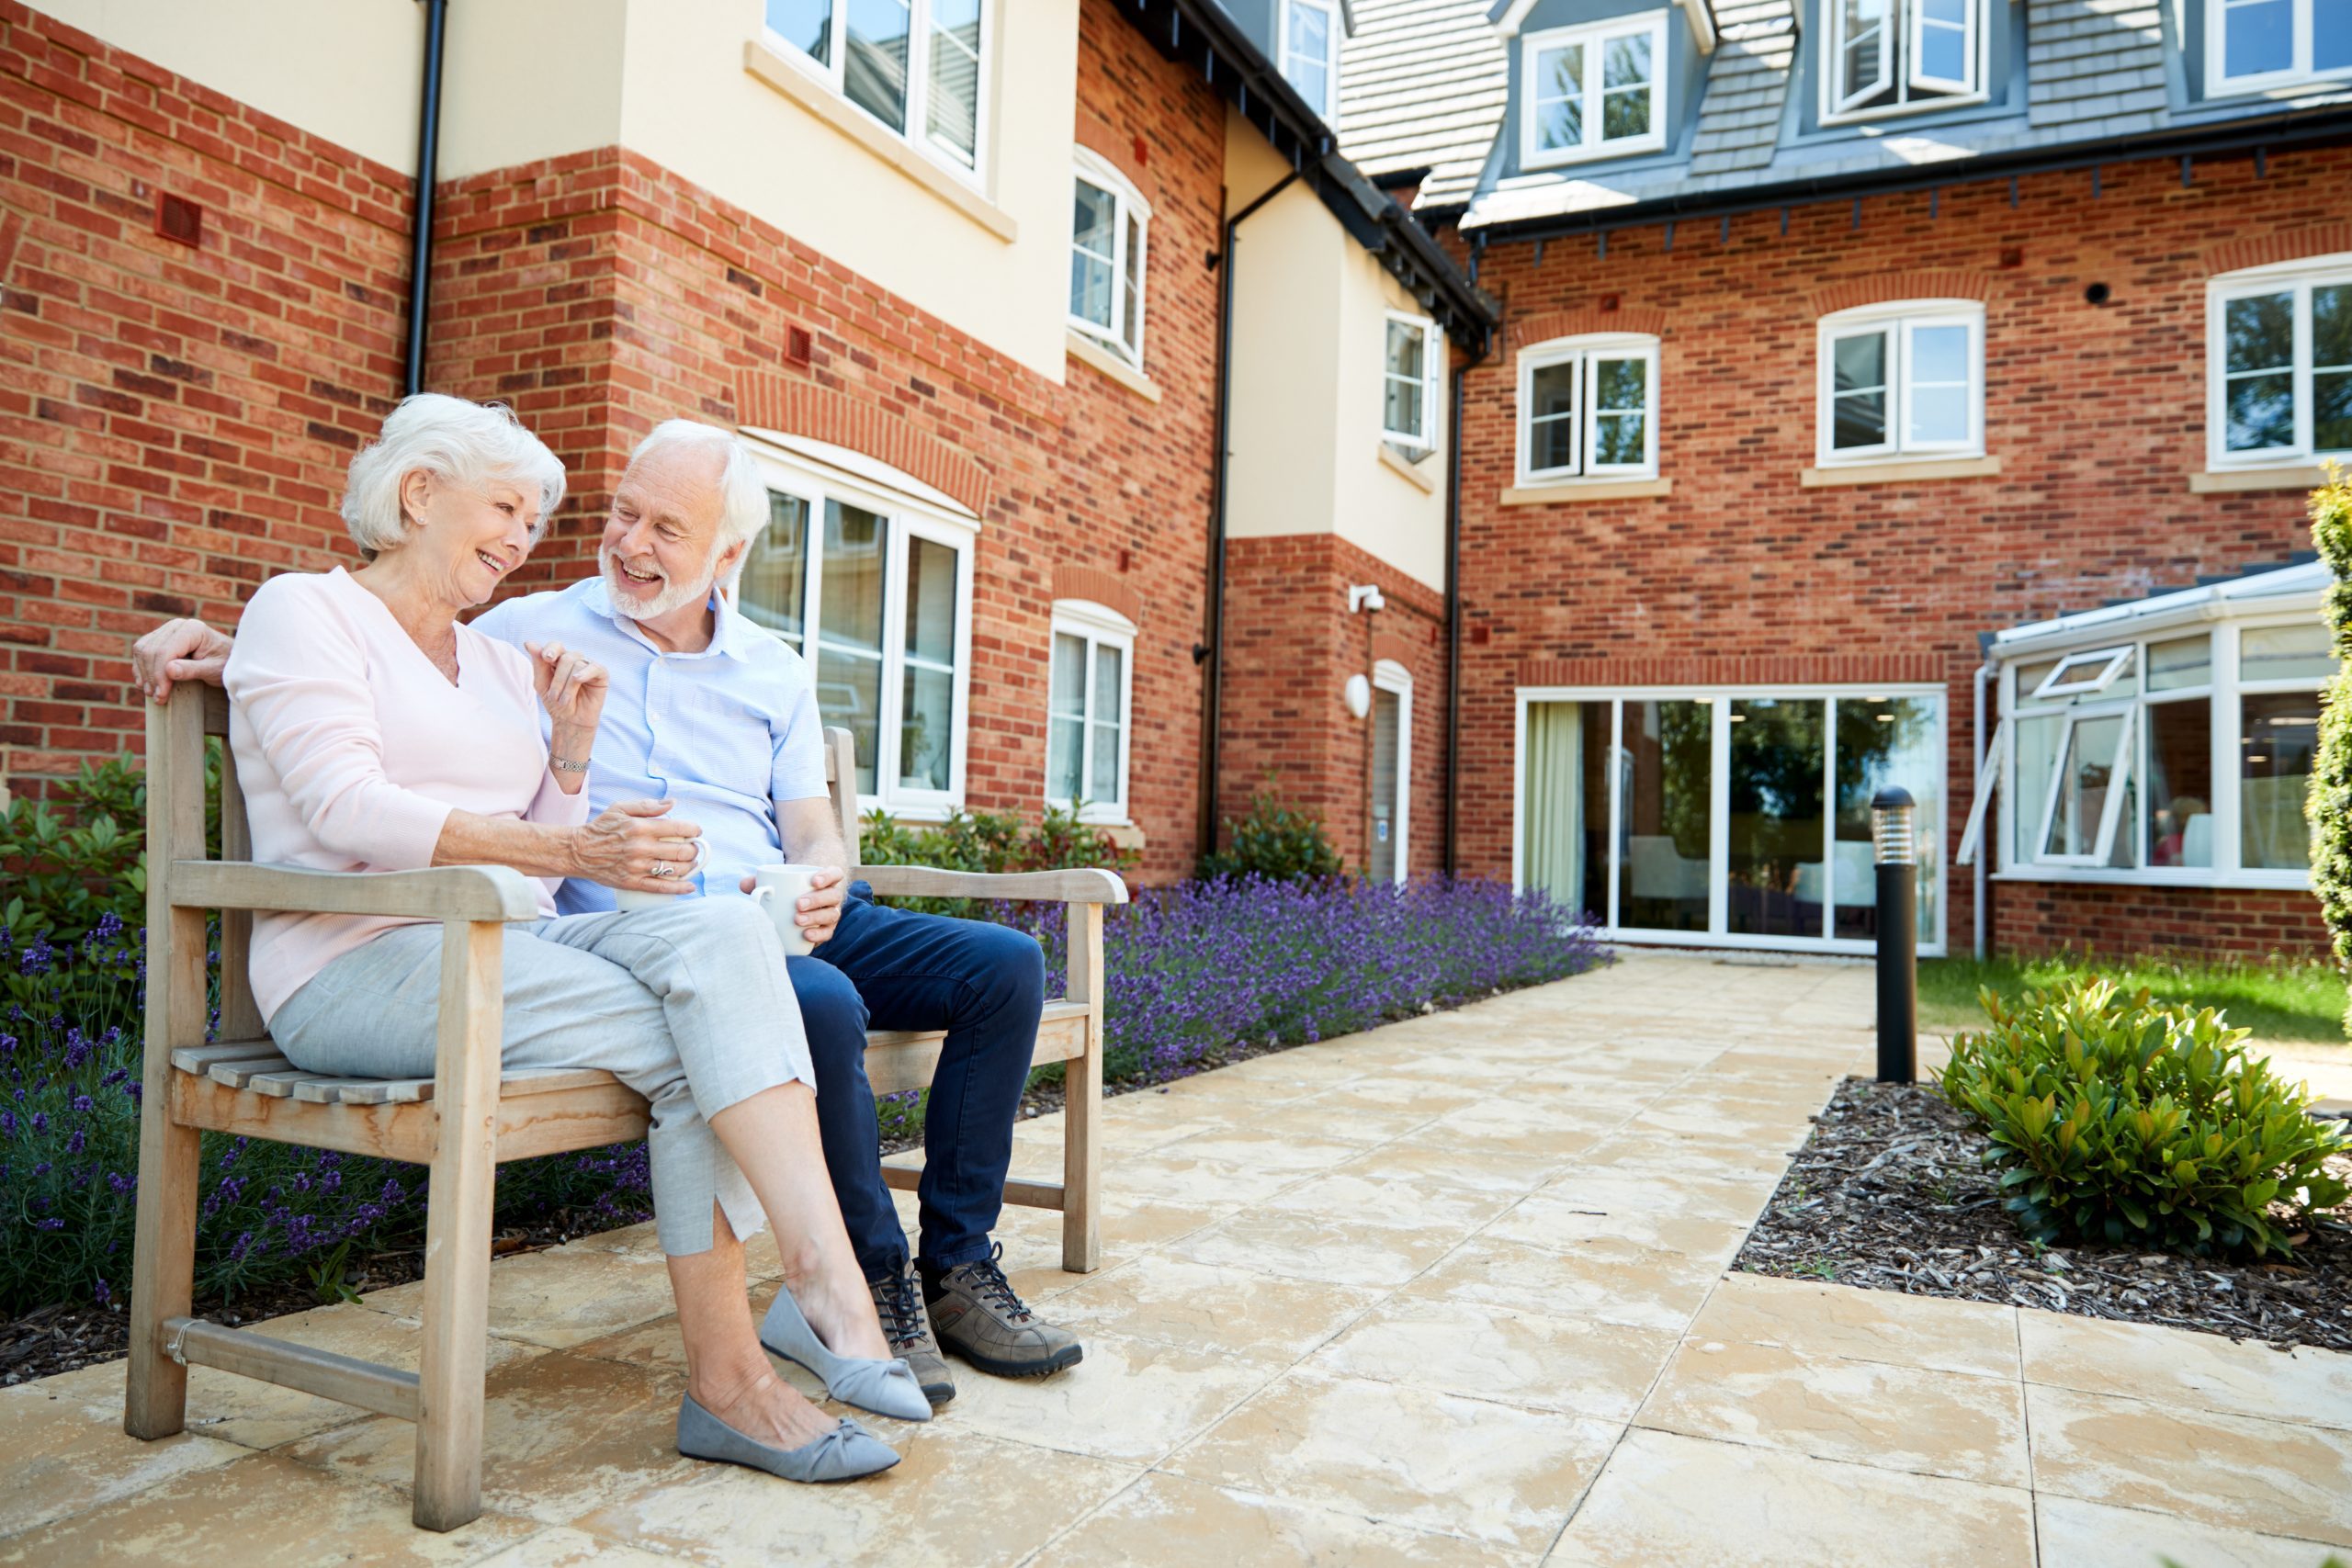 Key issues to consider before undertaking a care home renovation